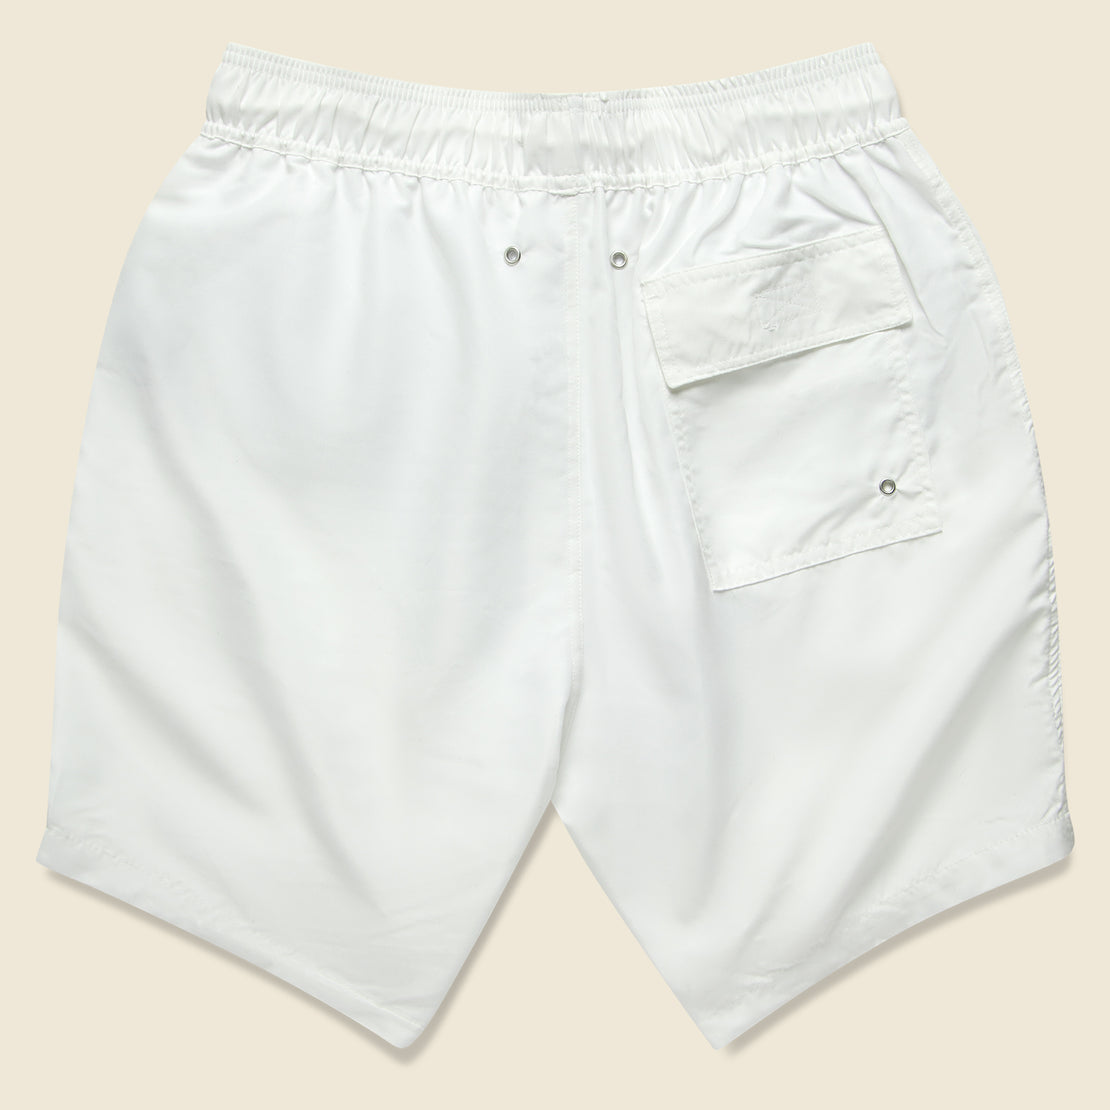 Seal Swim Trunk - White - Penfield - STAG Provisions - Shorts - Swim